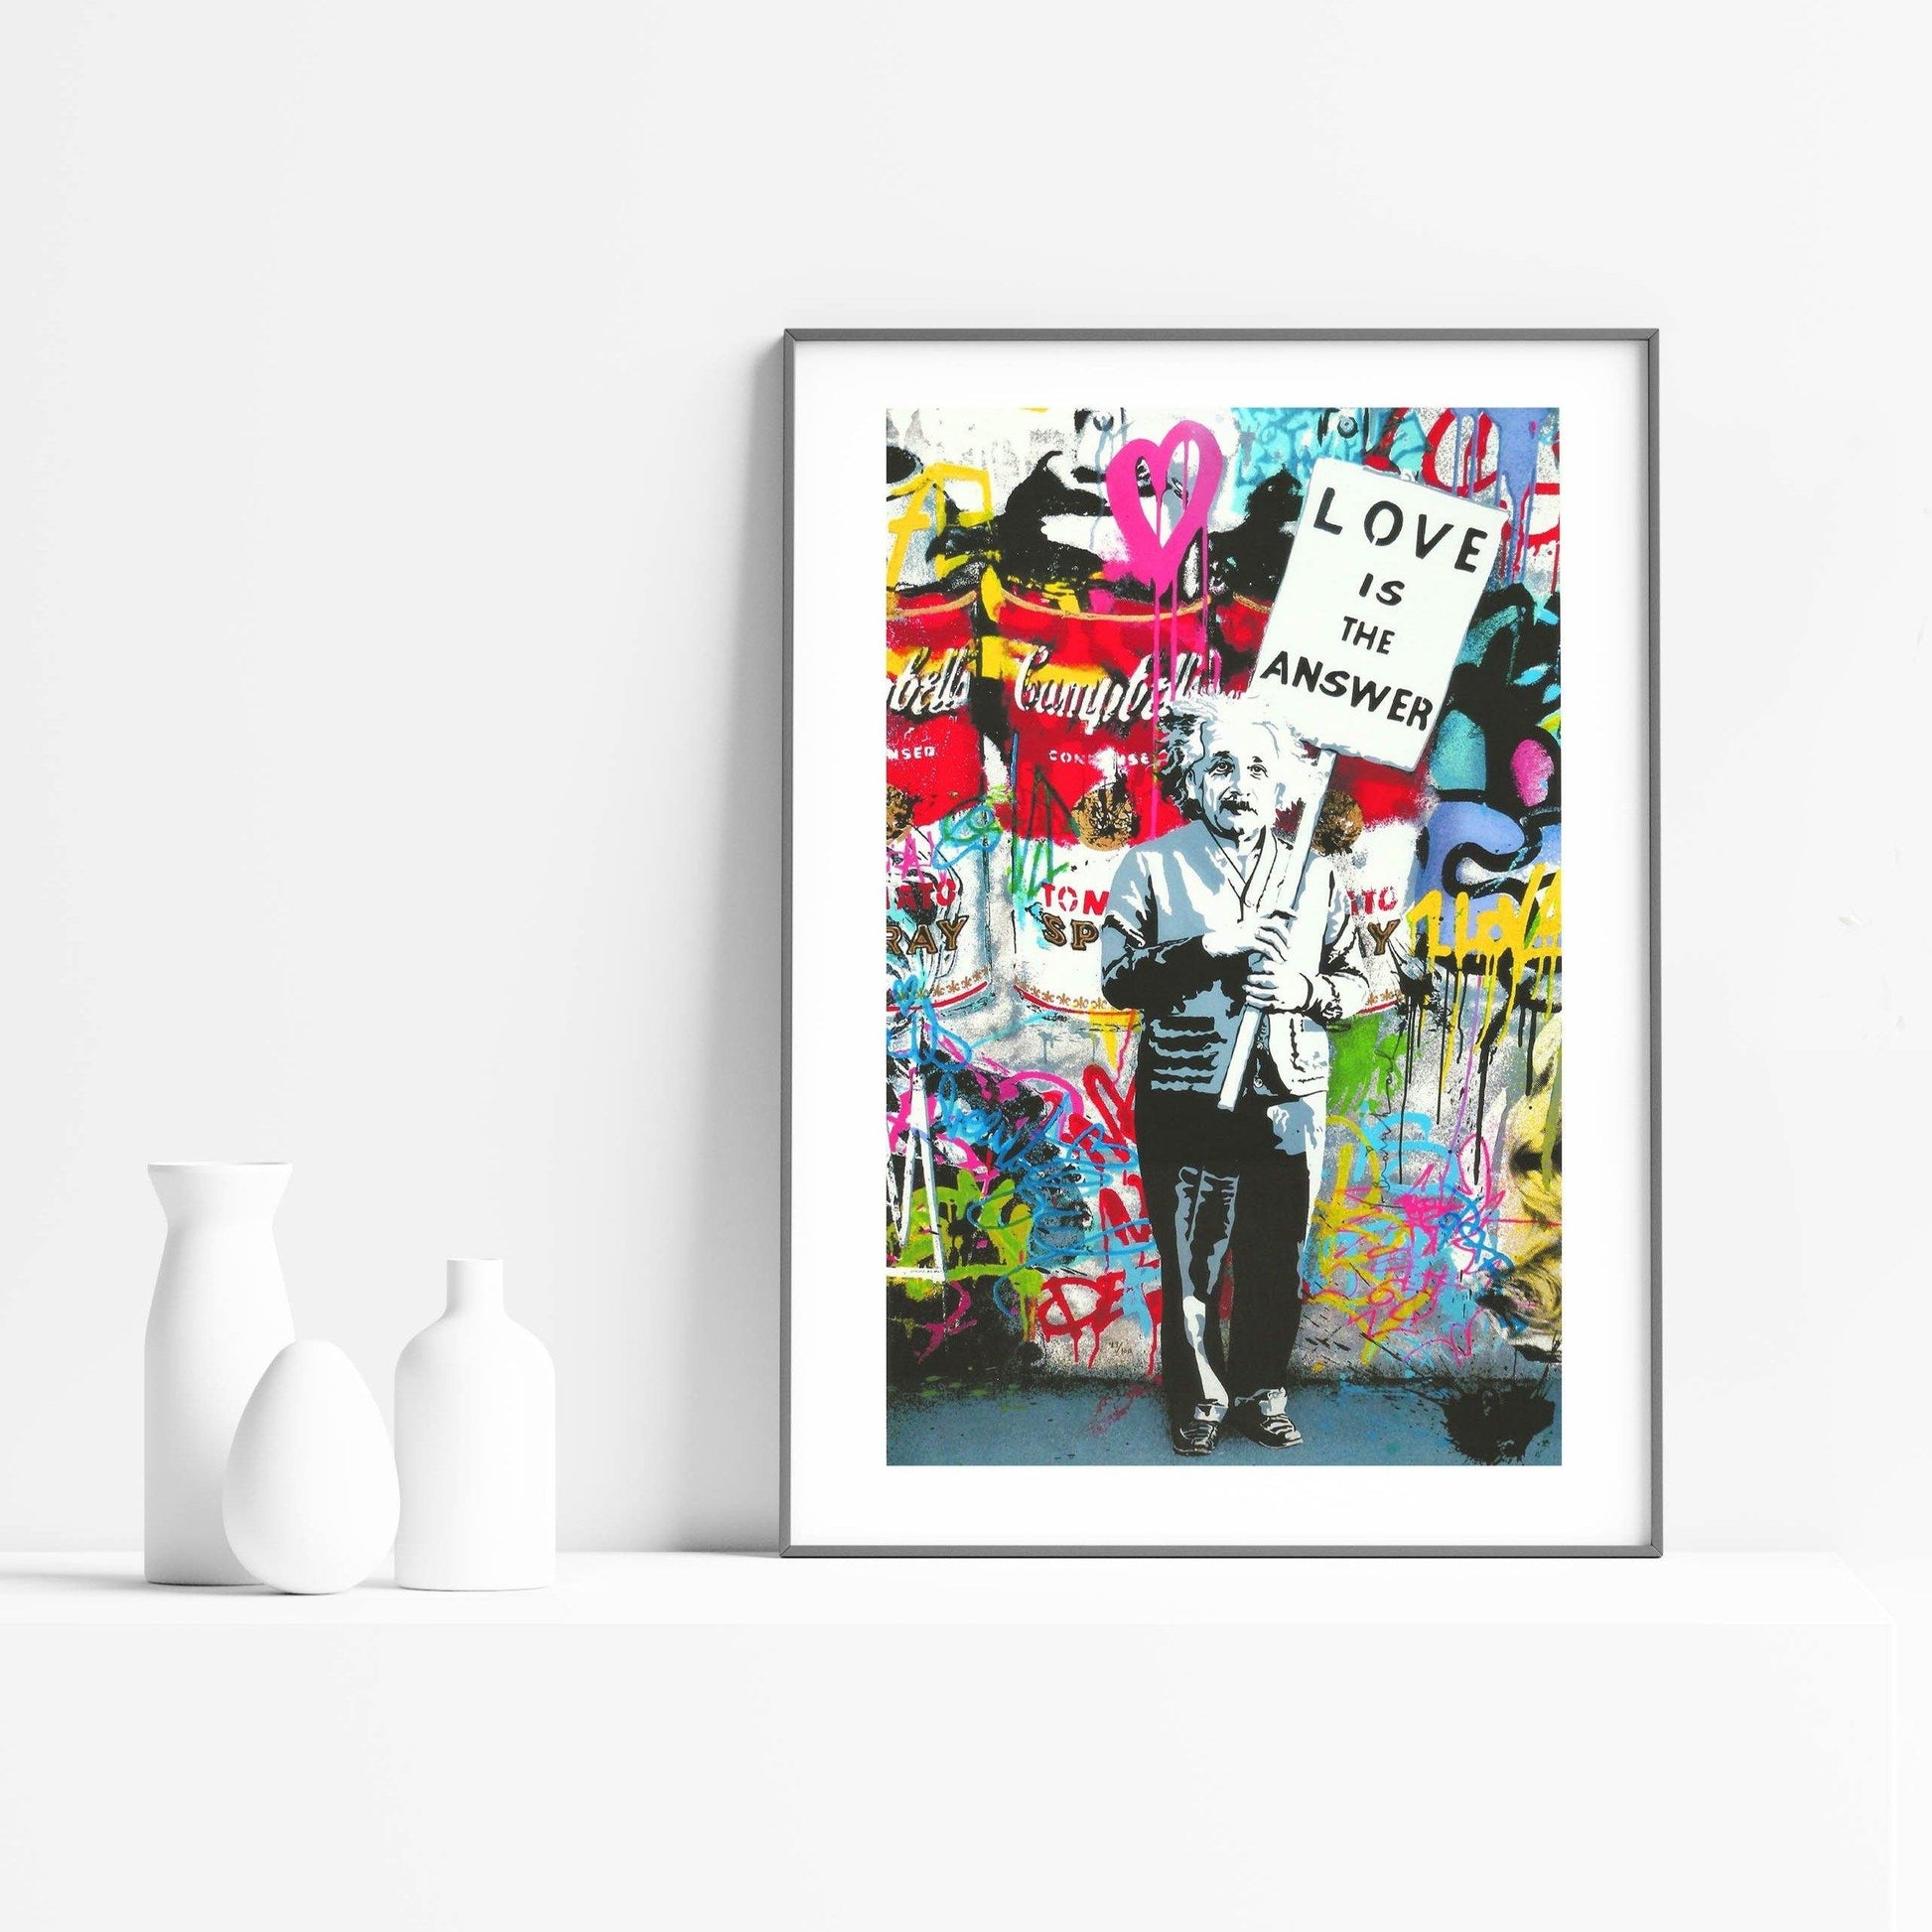 Available in a range of sizes, this poster is perfect for adding a splash of color to your walls. One of the most iconic pieces by the legend that is Mr Brainwash, this vibrant poster is sure to make a statement. Depicting the message that love is the answer, it's a must-have for any art lover. Featuring bright colors and a playful design, this poster is sure to add some personality to your home.- 98types